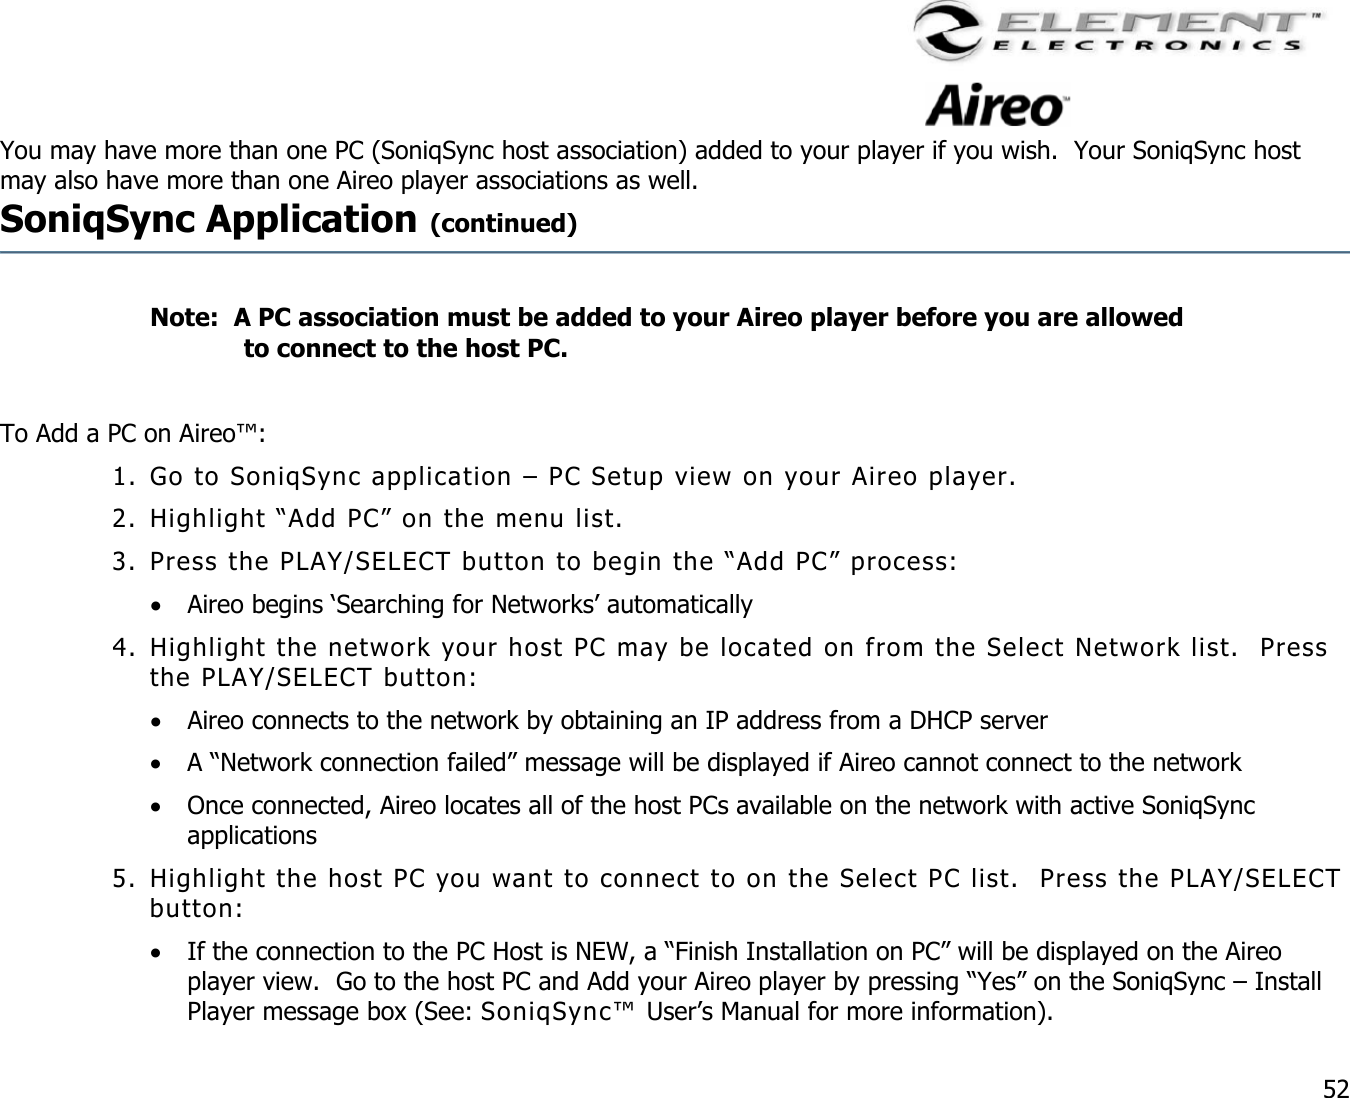                                                                                    52 You may have more than one PC (SoniqSync host association) added to your player if you wish.  Your SoniqSync host may also have more than one Aireo player associations as well.   SoniqSync Application (continued)     Note:  A PC association must be added to your Aireo player before you are allowed to connect to the host PC.  To Add a PC on Aireo™: 1. Go to SoniqSync application – PC Setup view on your Aireo player. 2. Highlight “Add PC” on the menu list. 3. Press the PLAY/SELECT button to begin the “Add PC” process: •  Aireo begins ‘Searching for Networks’ automatically 4. Highlight the network your host PC may be located on from the Select Network list.  Press the PLAY/SELECT button: •  Aireo connects to the network by obtaining an IP address from a DHCP server  •  A “Network connection failed” message will be displayed if Aireo cannot connect to the network •  Once connected, Aireo locates all of the host PCs available on the network with active SoniqSync applications 5. Highlight the host PC you want to connect to on the Select PC list.  Press the PLAY/SELECT button: •  If the connection to the PC Host is NEW, a “Finish Installation on PC” will be displayed on the Aireo player view.  Go to the host PC and Add your Aireo player by pressing “Yes” on the SoniqSync – Install Player message box (See: SoniqSync™ User’s Manual for more information). 